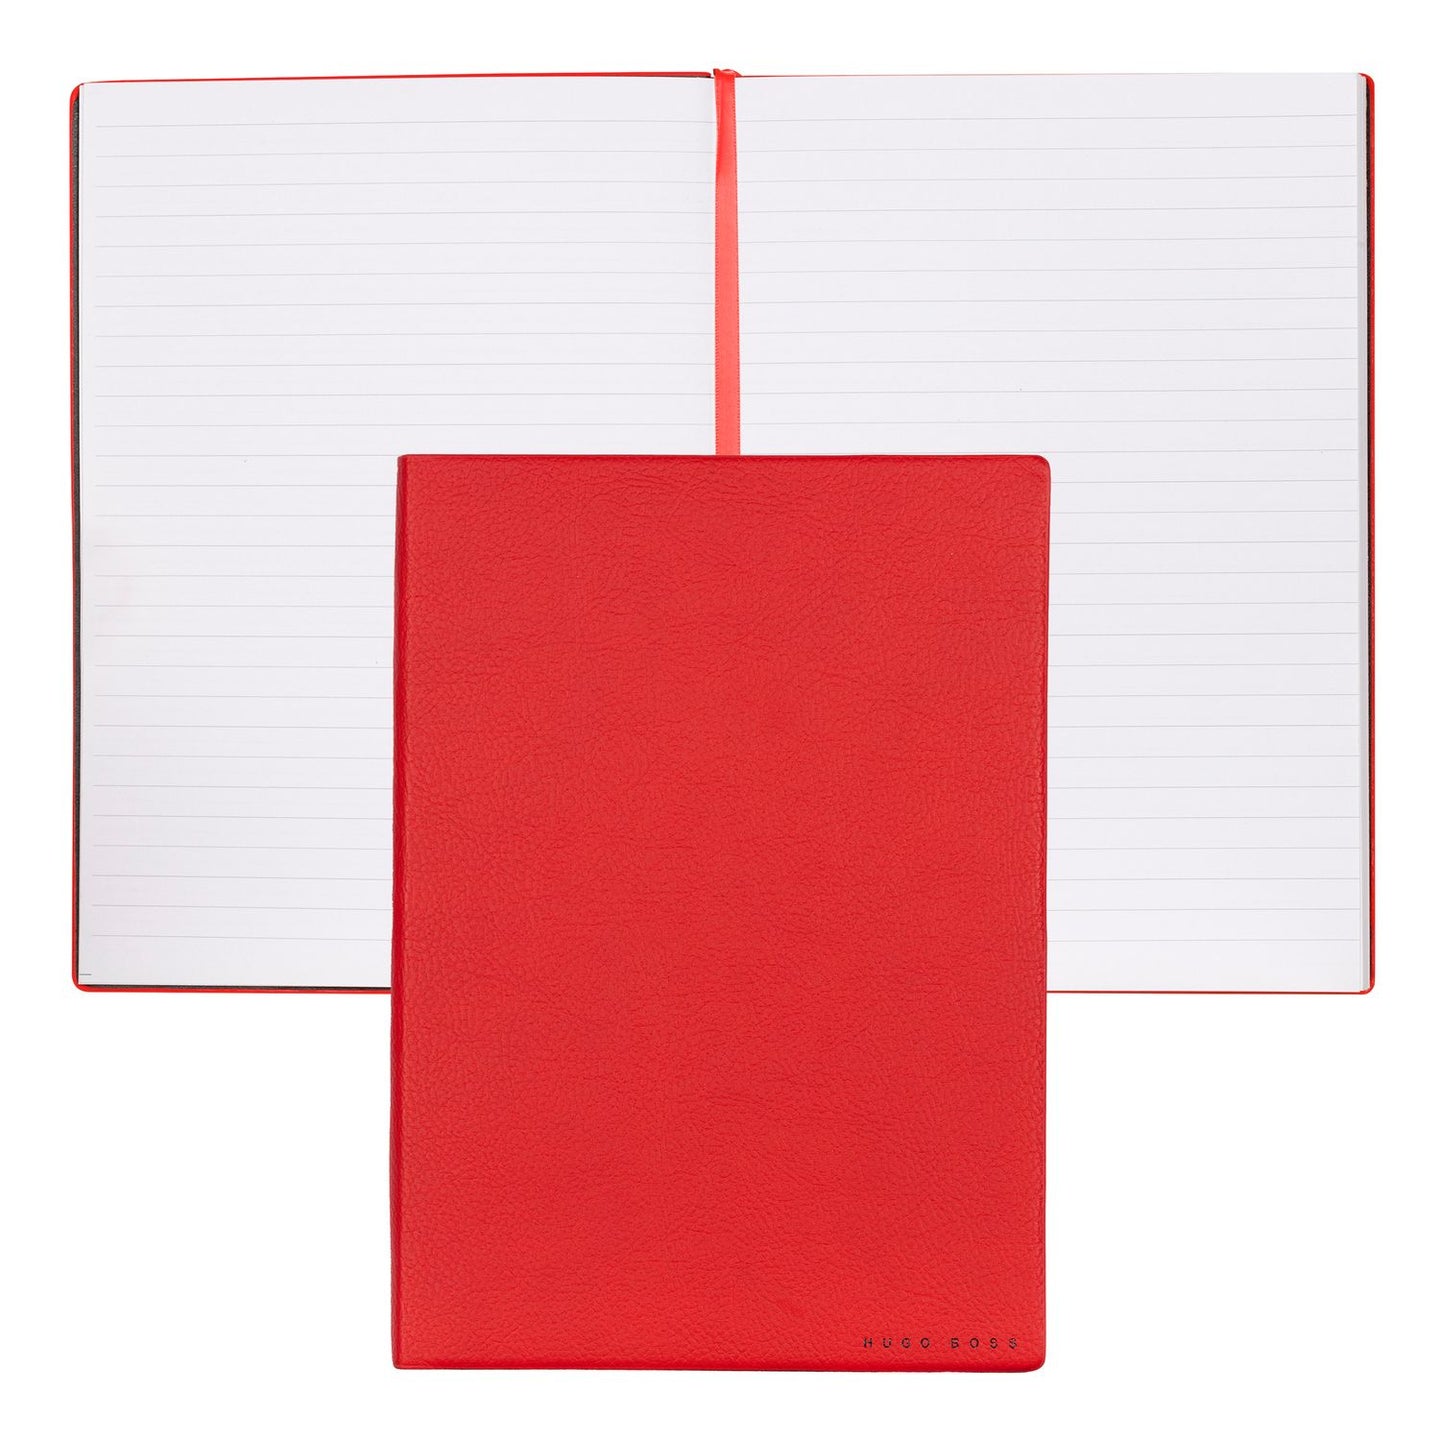 Hugo Boss Notizbuch A5 Essential Storyline Red Lined